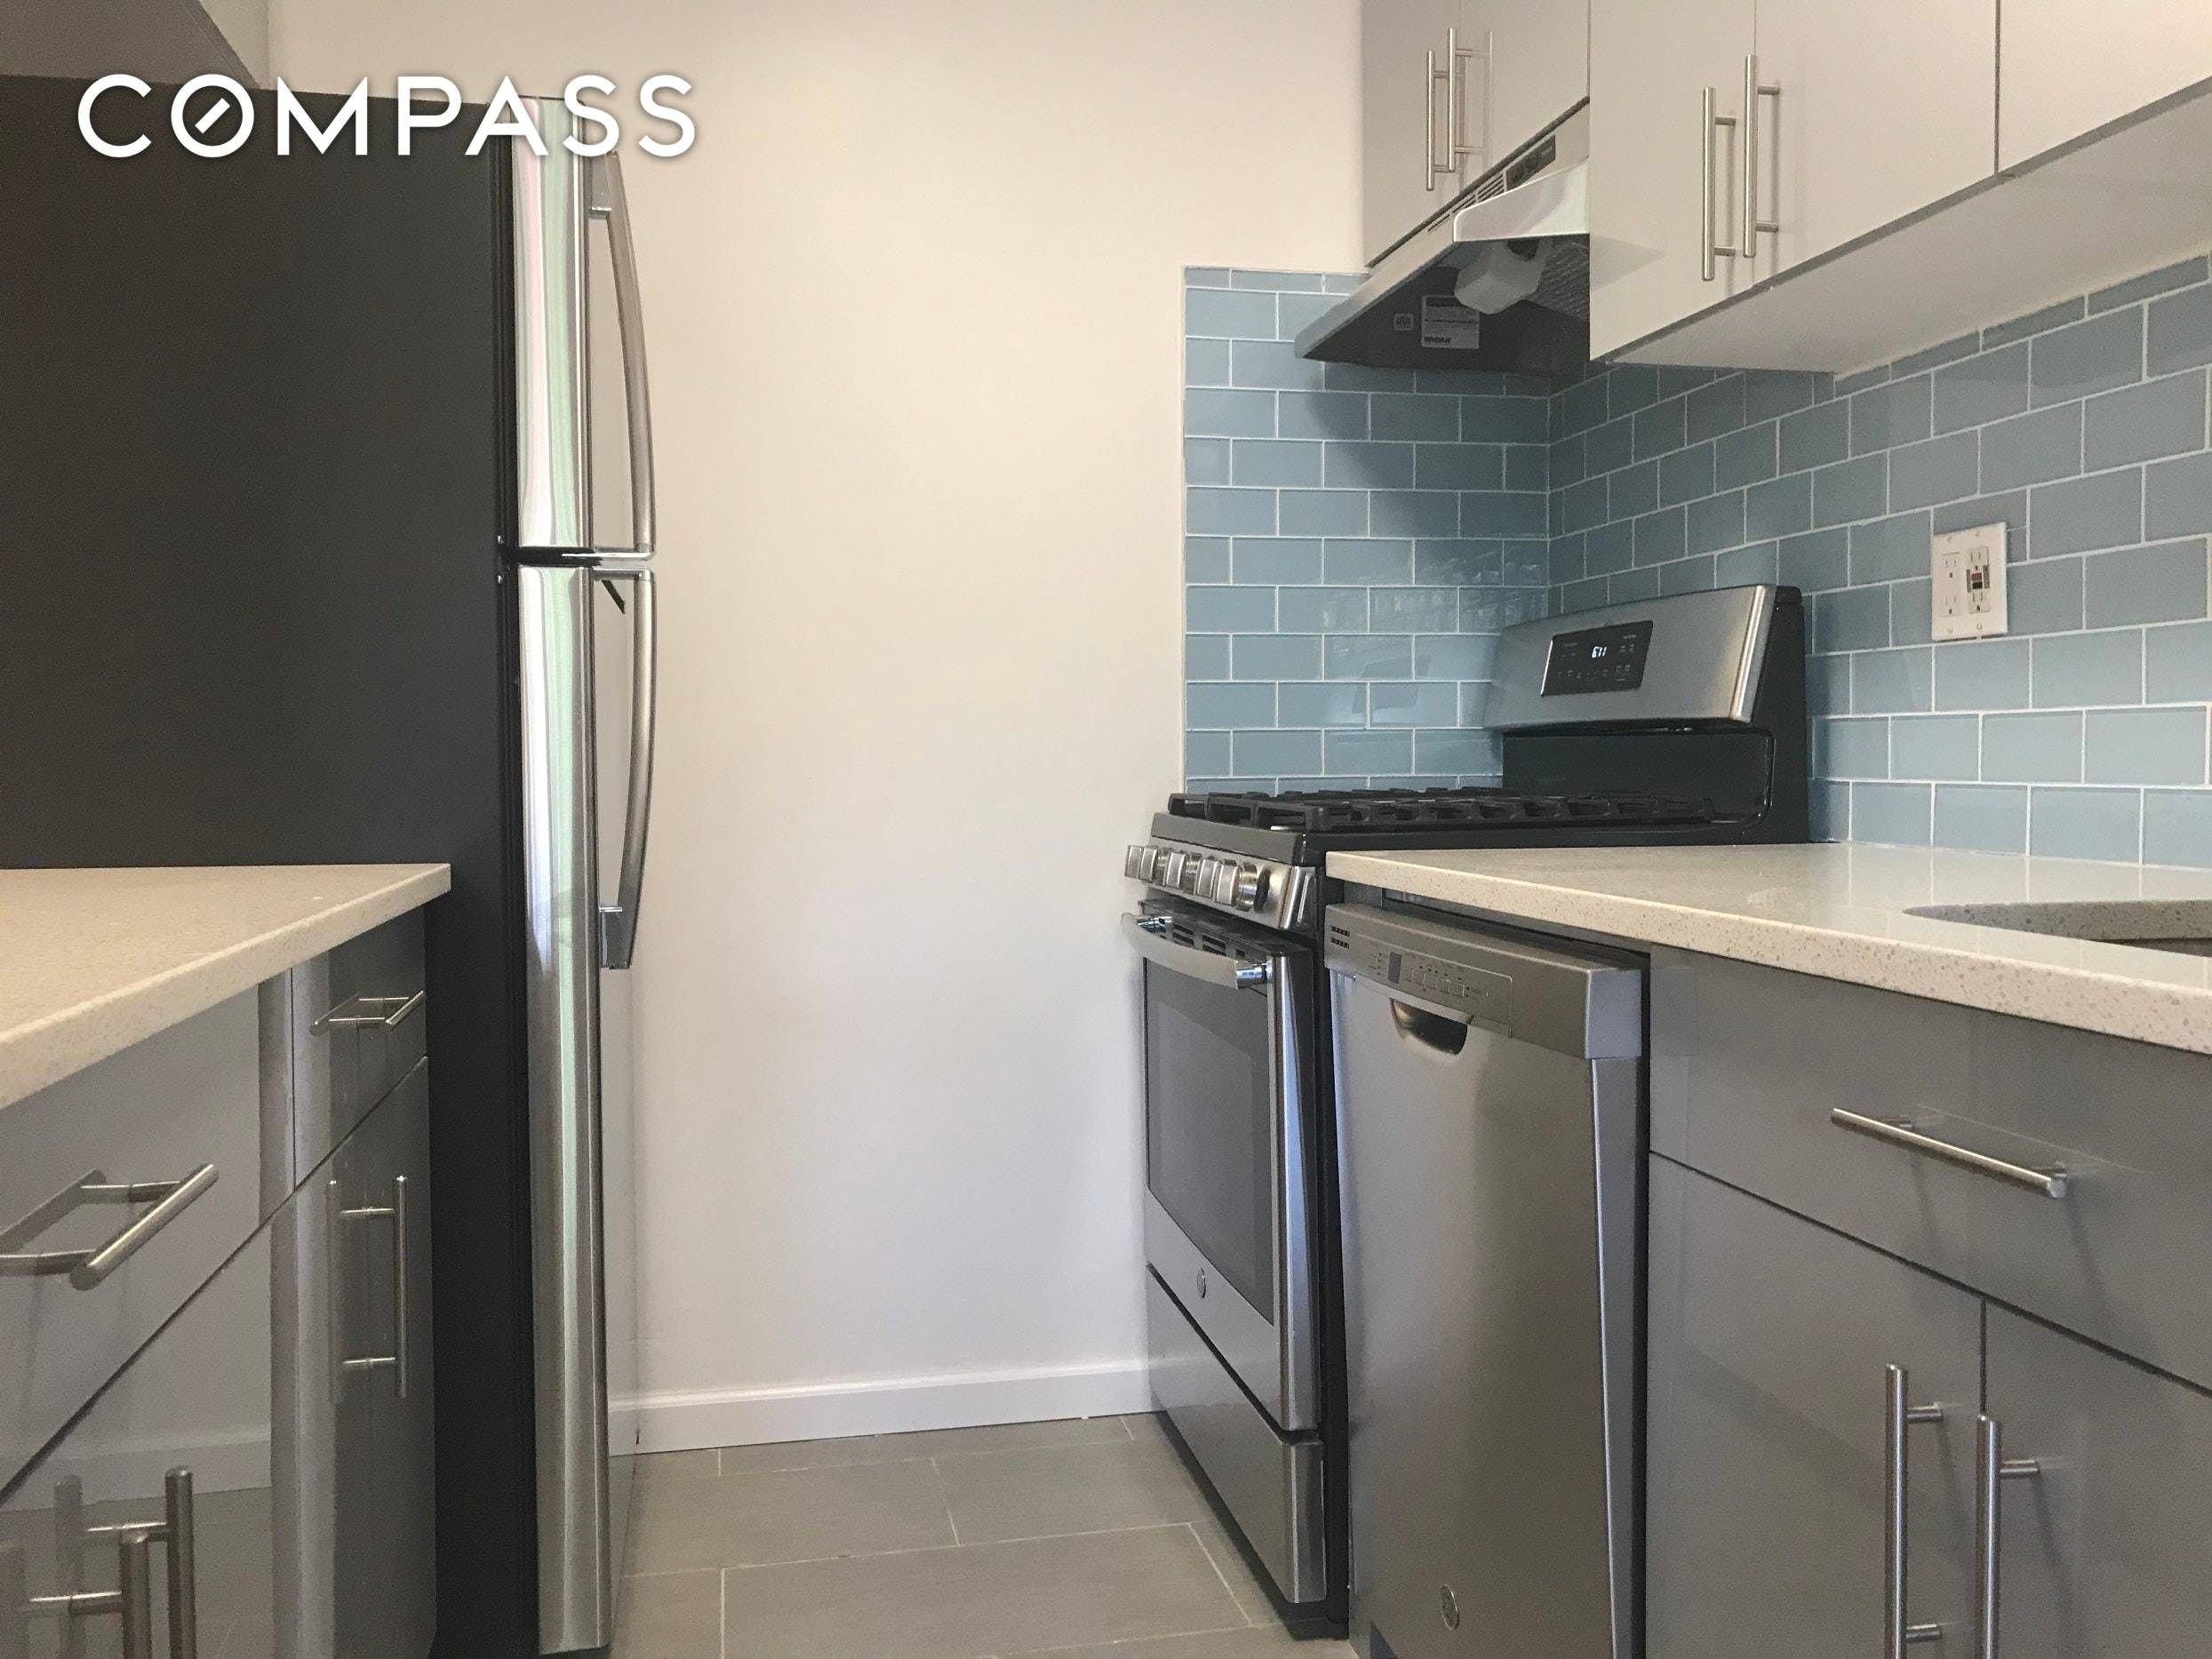 Coming Soon and No Fee ! Bright and recently renovated two bedroom one bath home at the Columbia Gardens building in the Columbia Waterfront District !